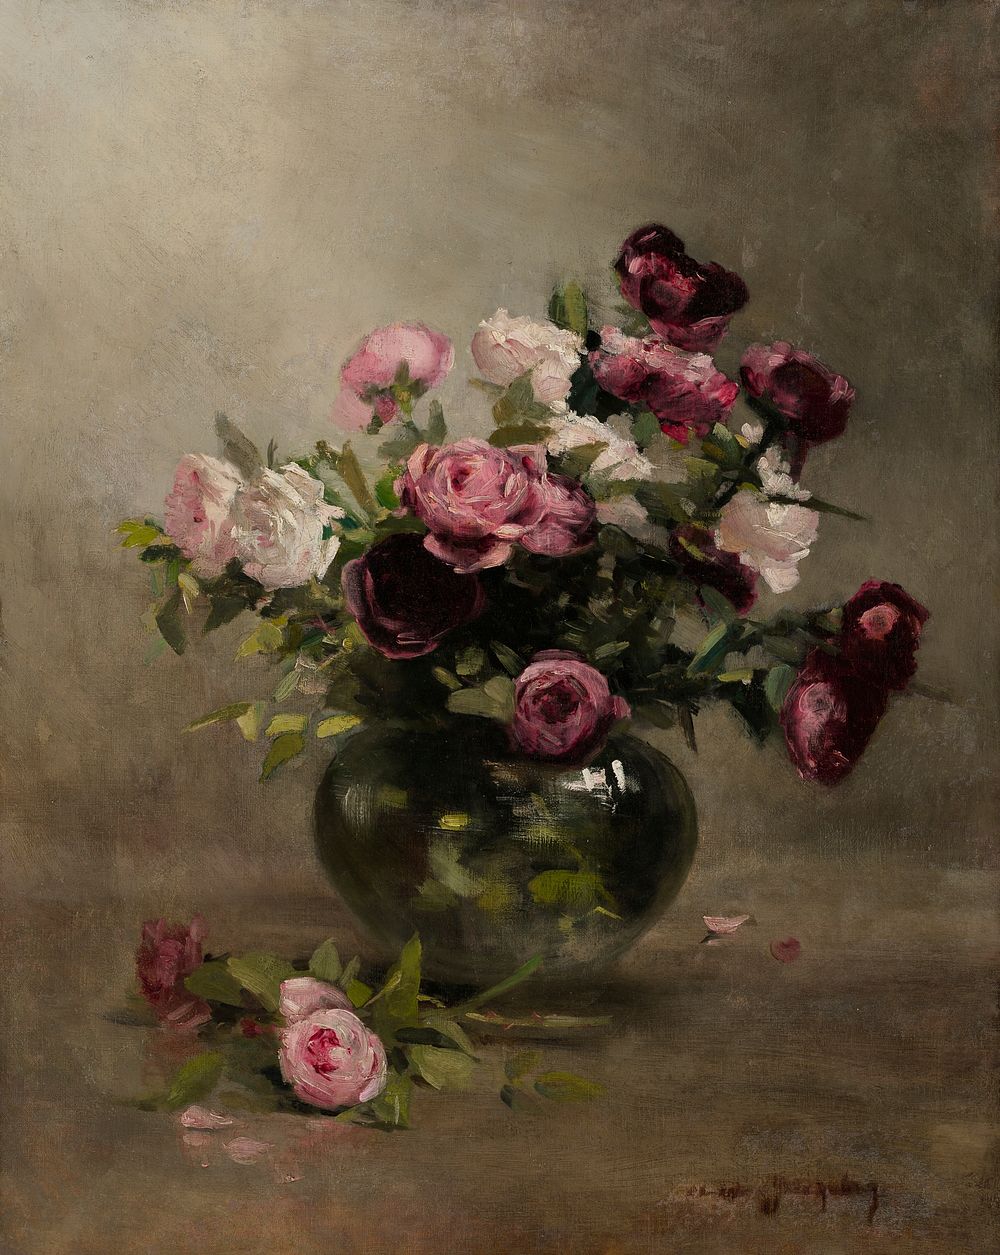 Vase of Roses (1870s) painting in high resolution by Eva Gonzales. Original from the Minneapolis Institute of Art. Digitally…